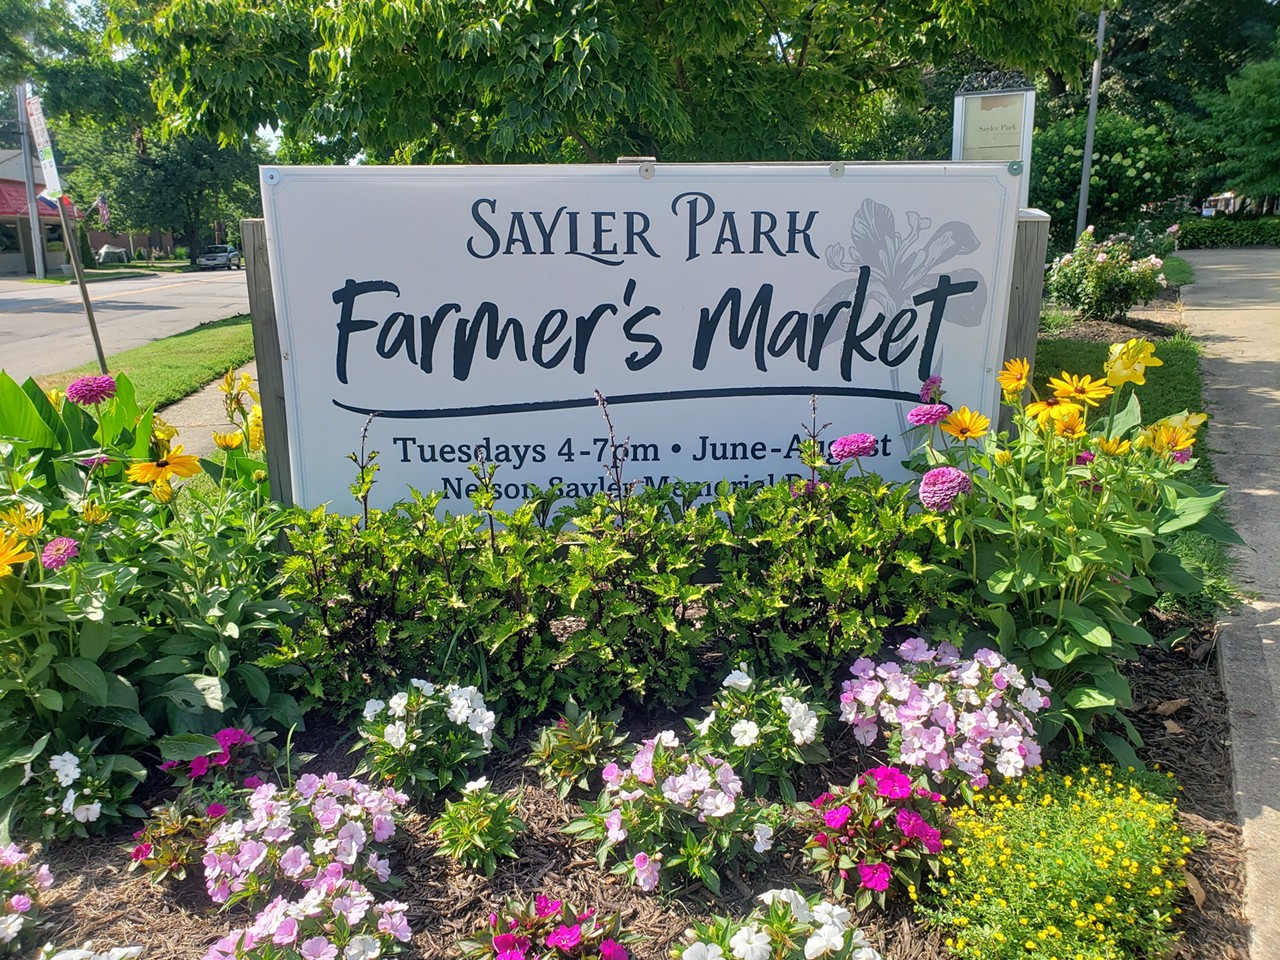 Sayler Park Farmers Market
​6600 Gracely Drive, Sayler Park
Tuesdays 4-7 p.m.
Enjoy live music from local musicians while you shop at the Sayler Park Farmers Market. The vendor lineup includes pet items, body care, candles, arts and crafts, tea and more.